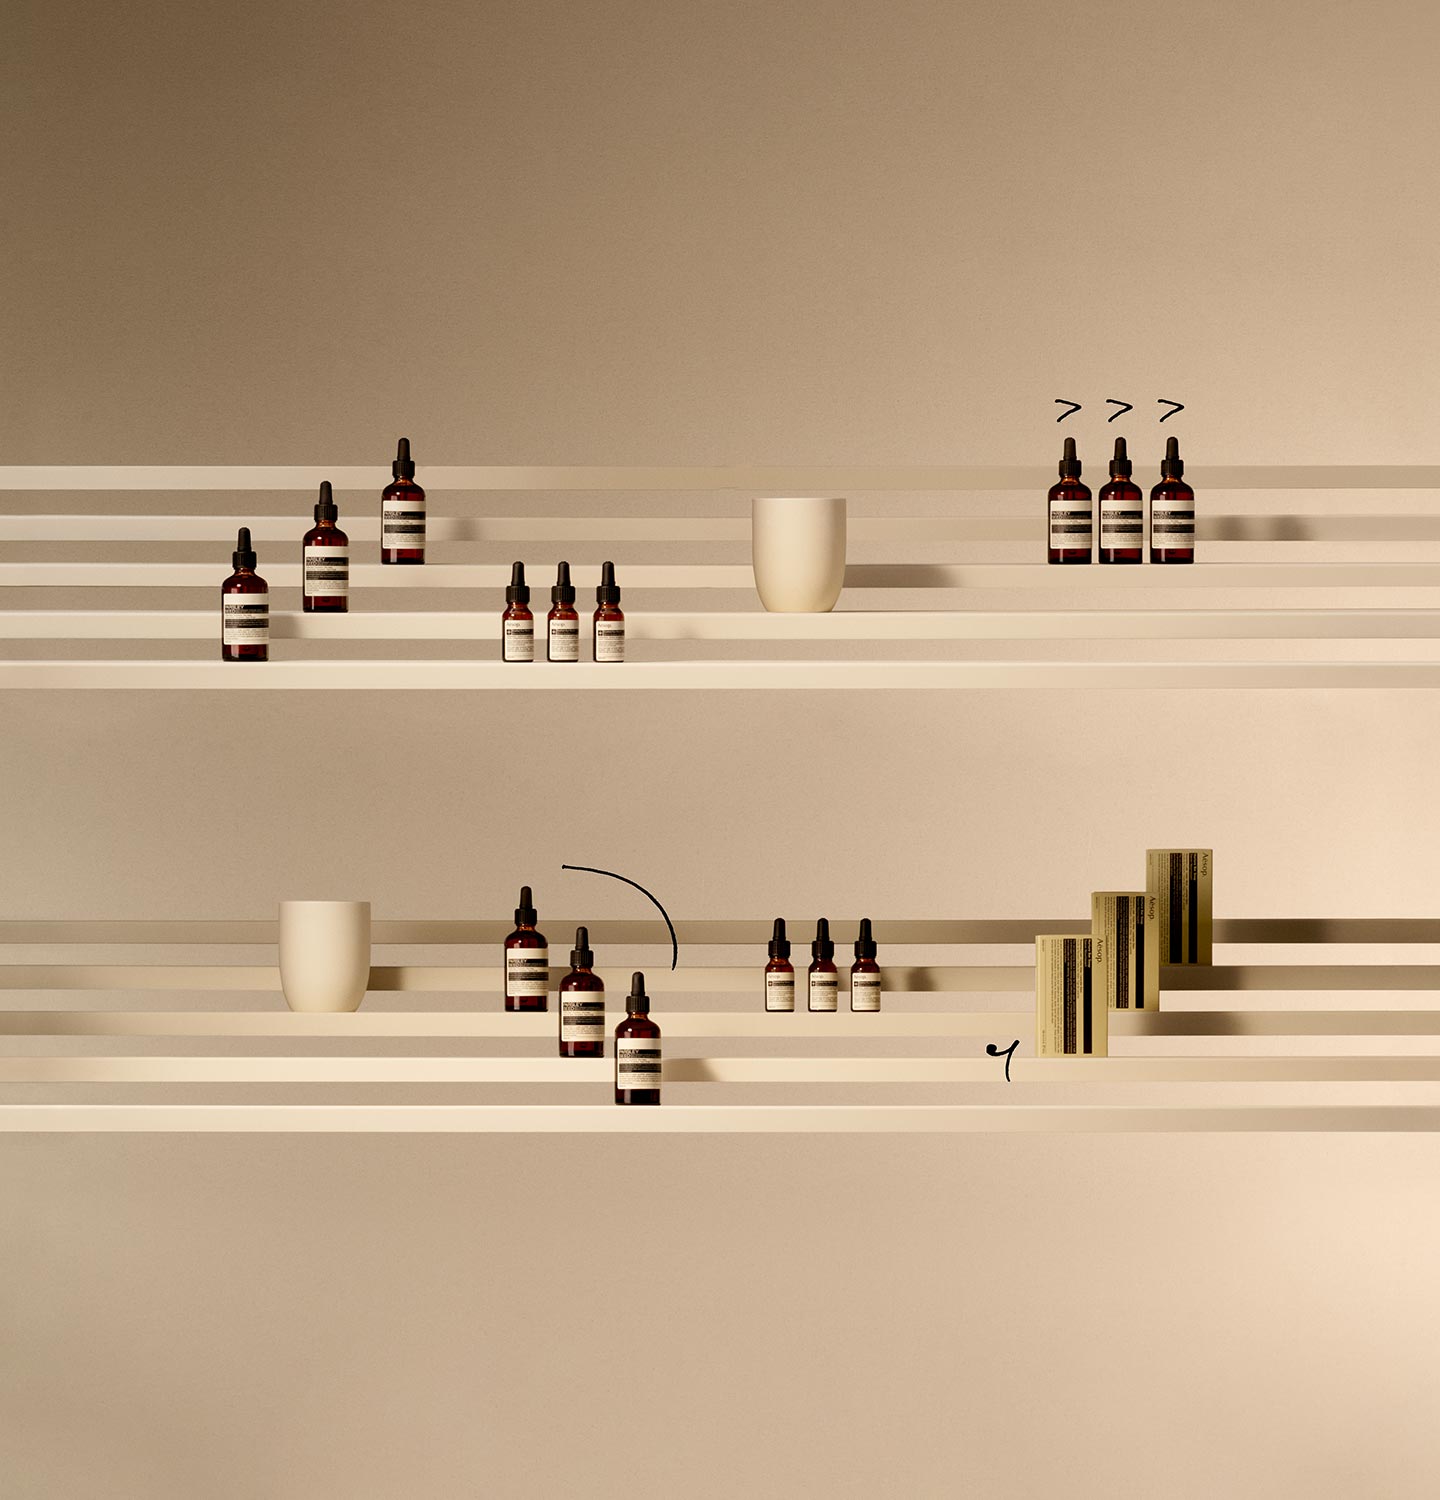 Aesop products and music notes placed on white stairs in beige background 